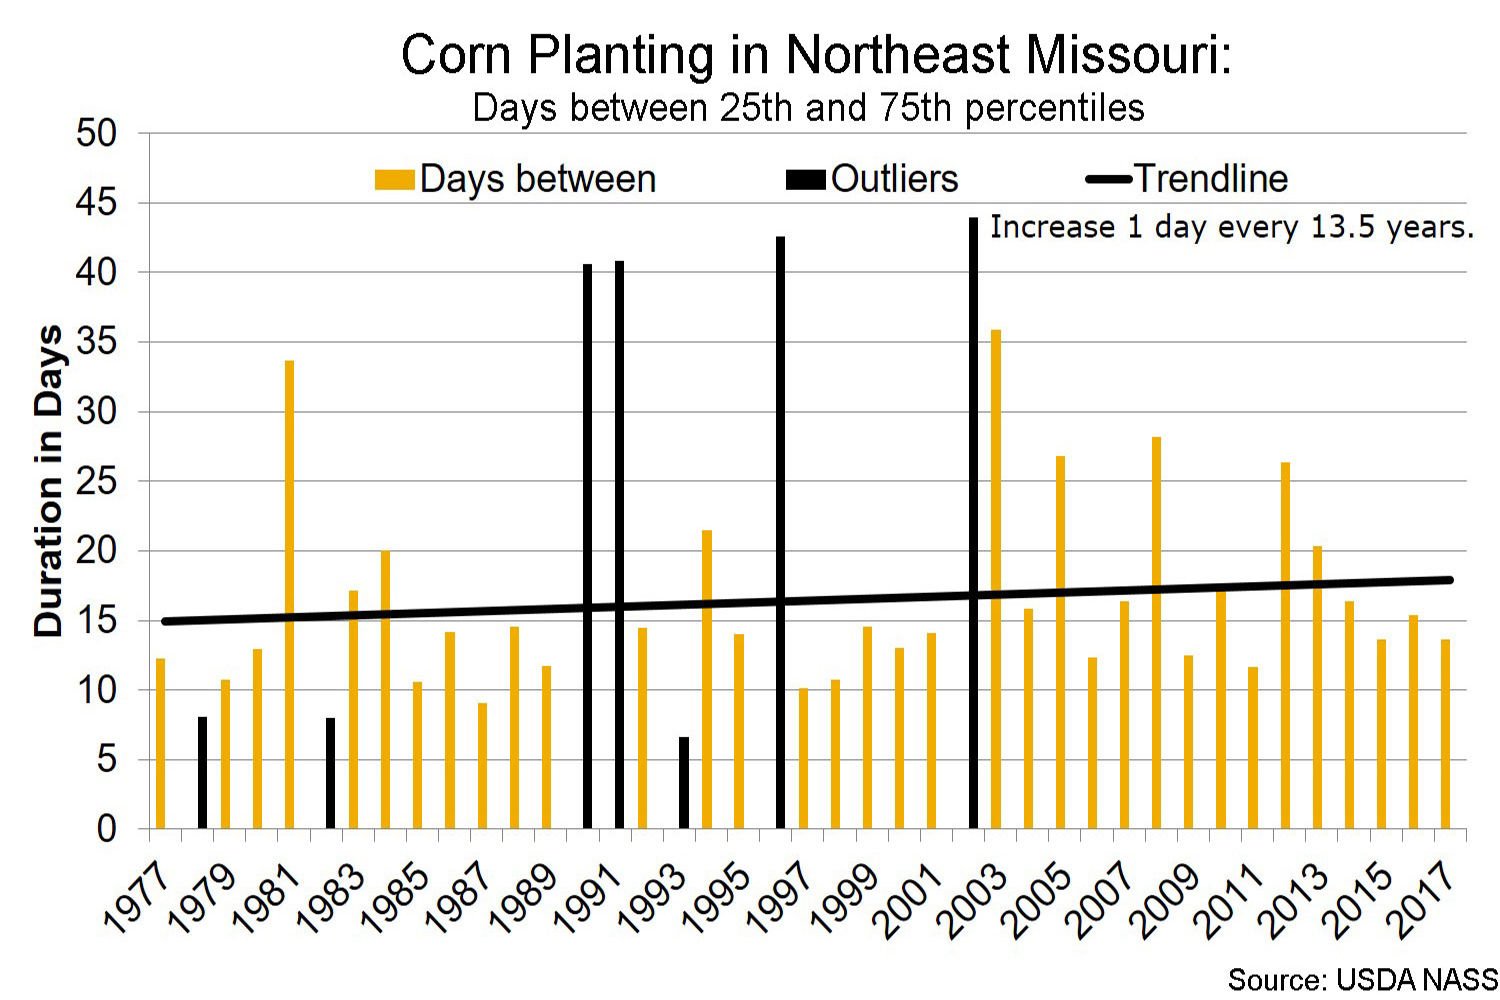 Corn planting in northeast Missouri days between 25th and 75th percentiles chart